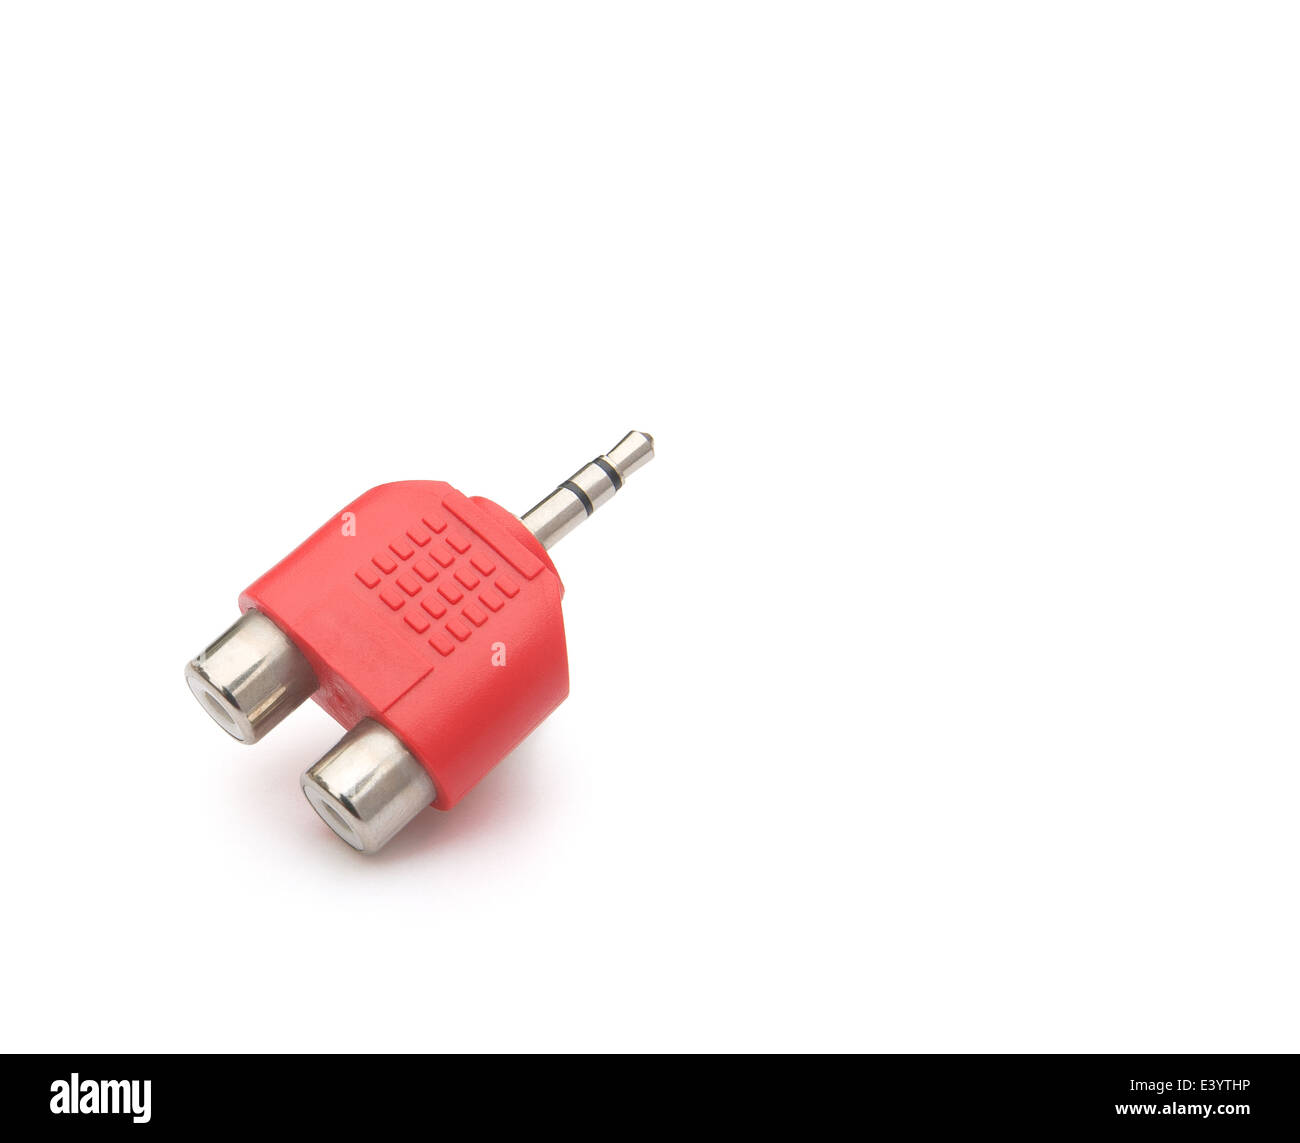 input & output plug with clipping path Stock Photo